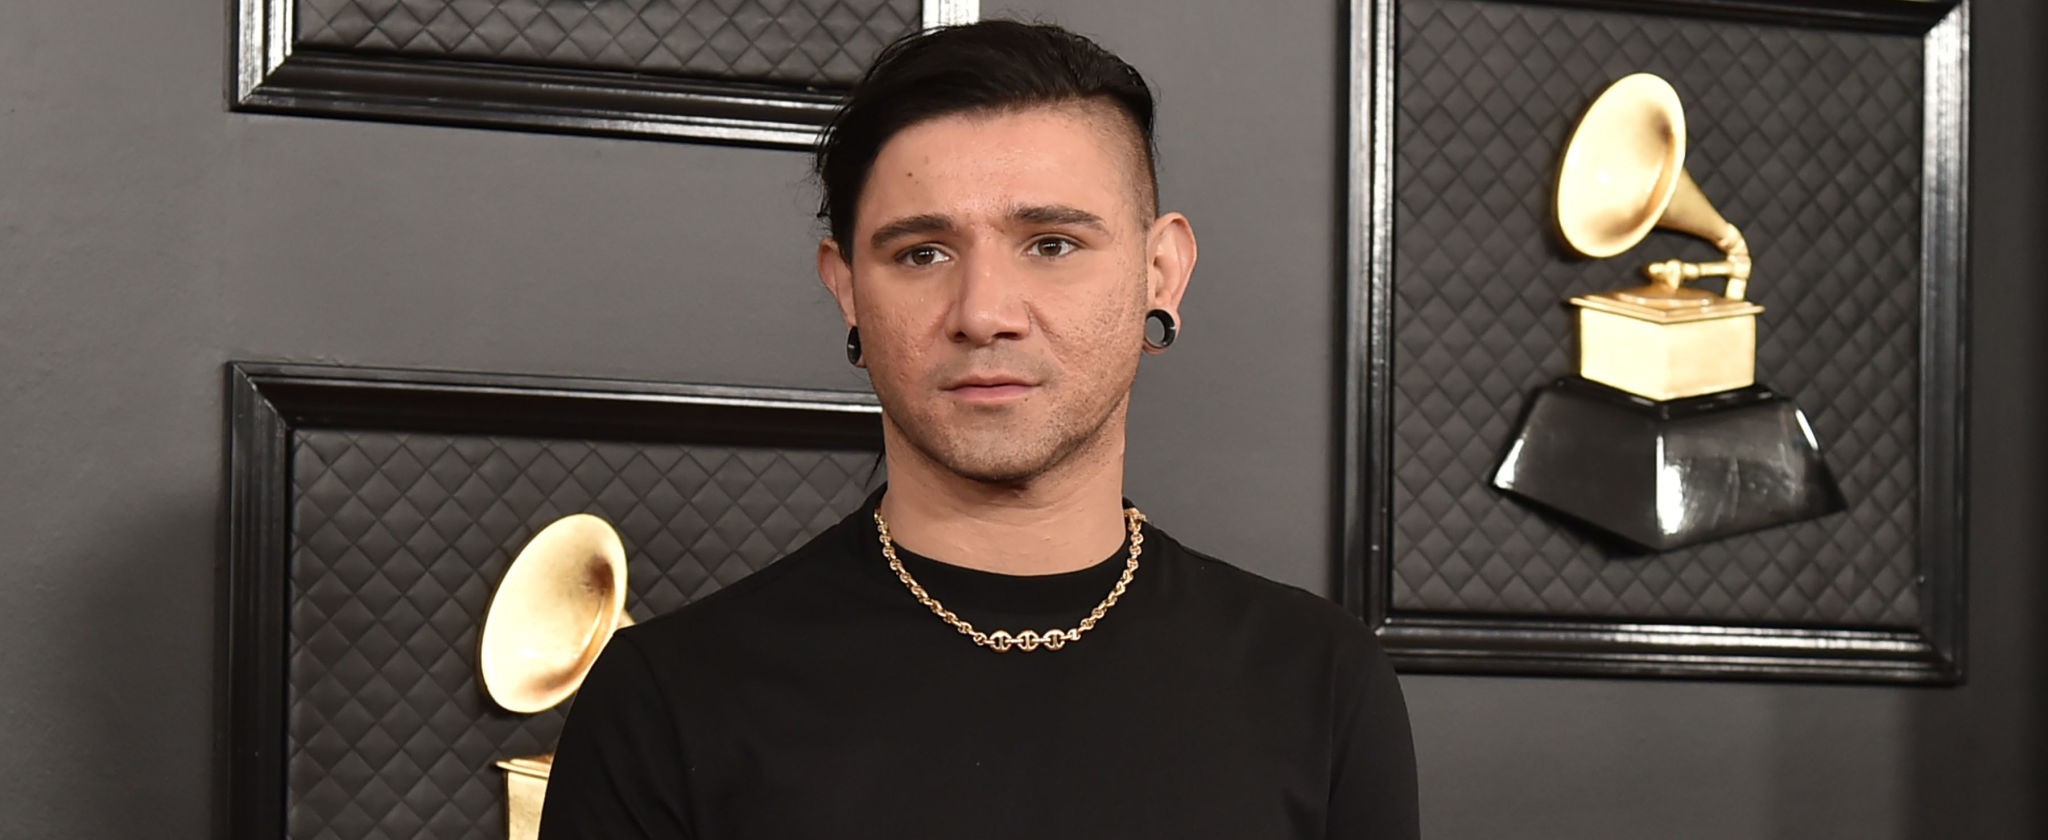 Who is Skrillex and what is his net worth